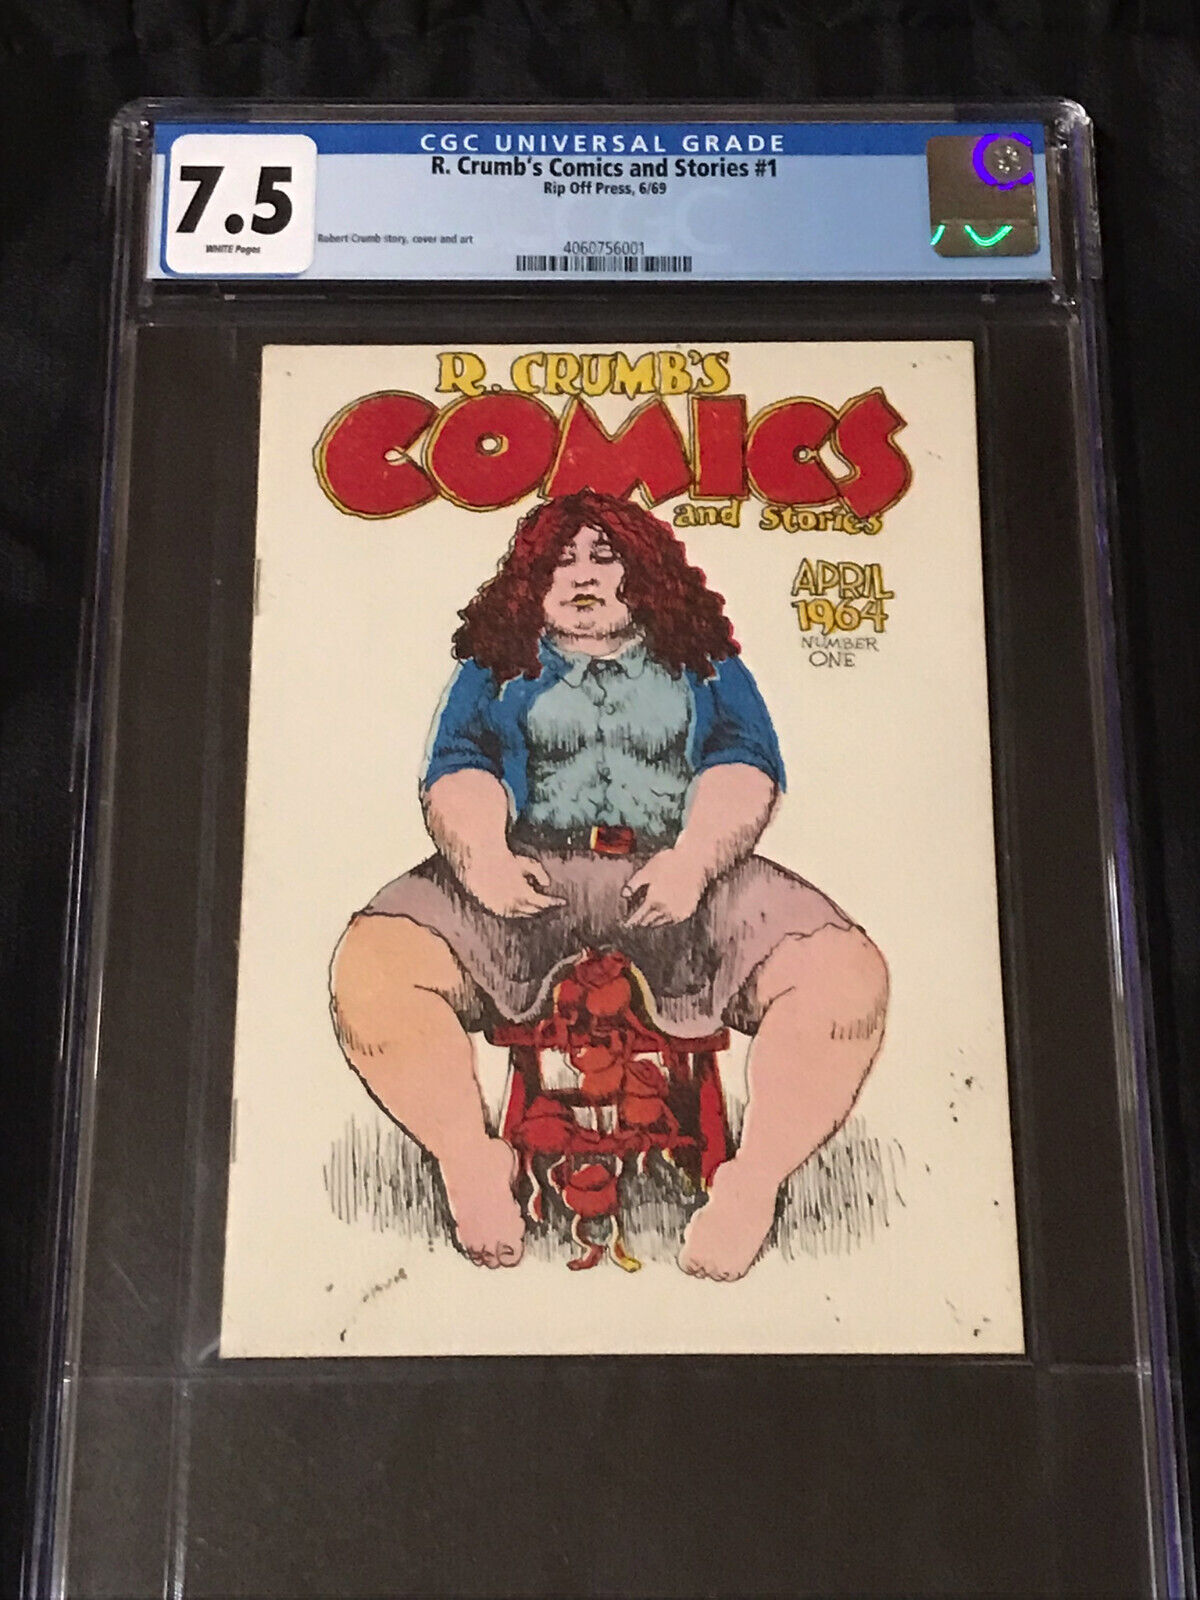 Rip Off Press 1969 R. Crumb's Comics and Stories #1 CGC 7.5 VF- with White Pages